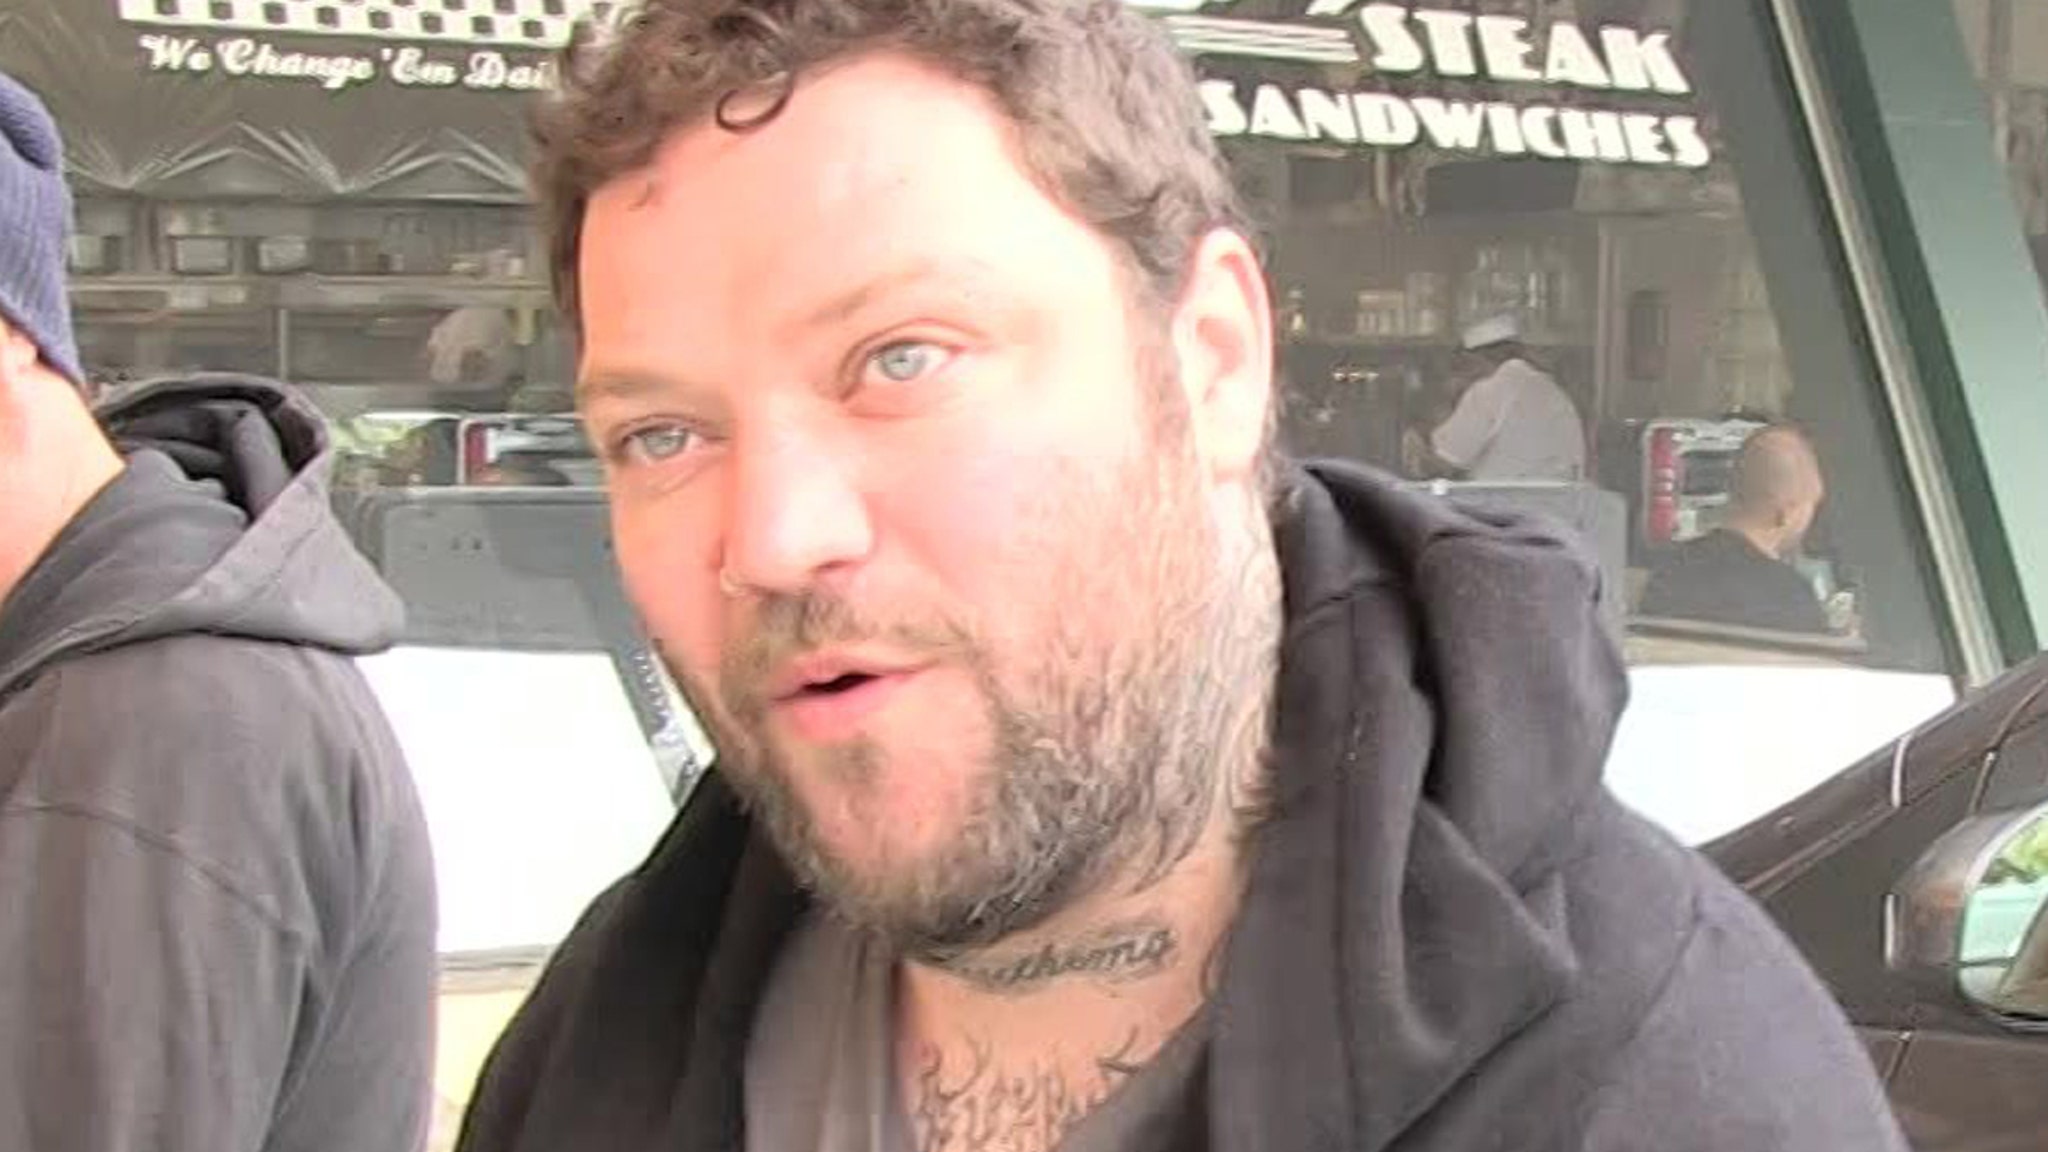 Bam Margera Upset He Hasn't Heard from Son or Wife Since Rehab Return - TMZ : Bam Margera is upset he hasn't heard from his son or estranged wife since going back to rehab.  | Tranquility 國際社群